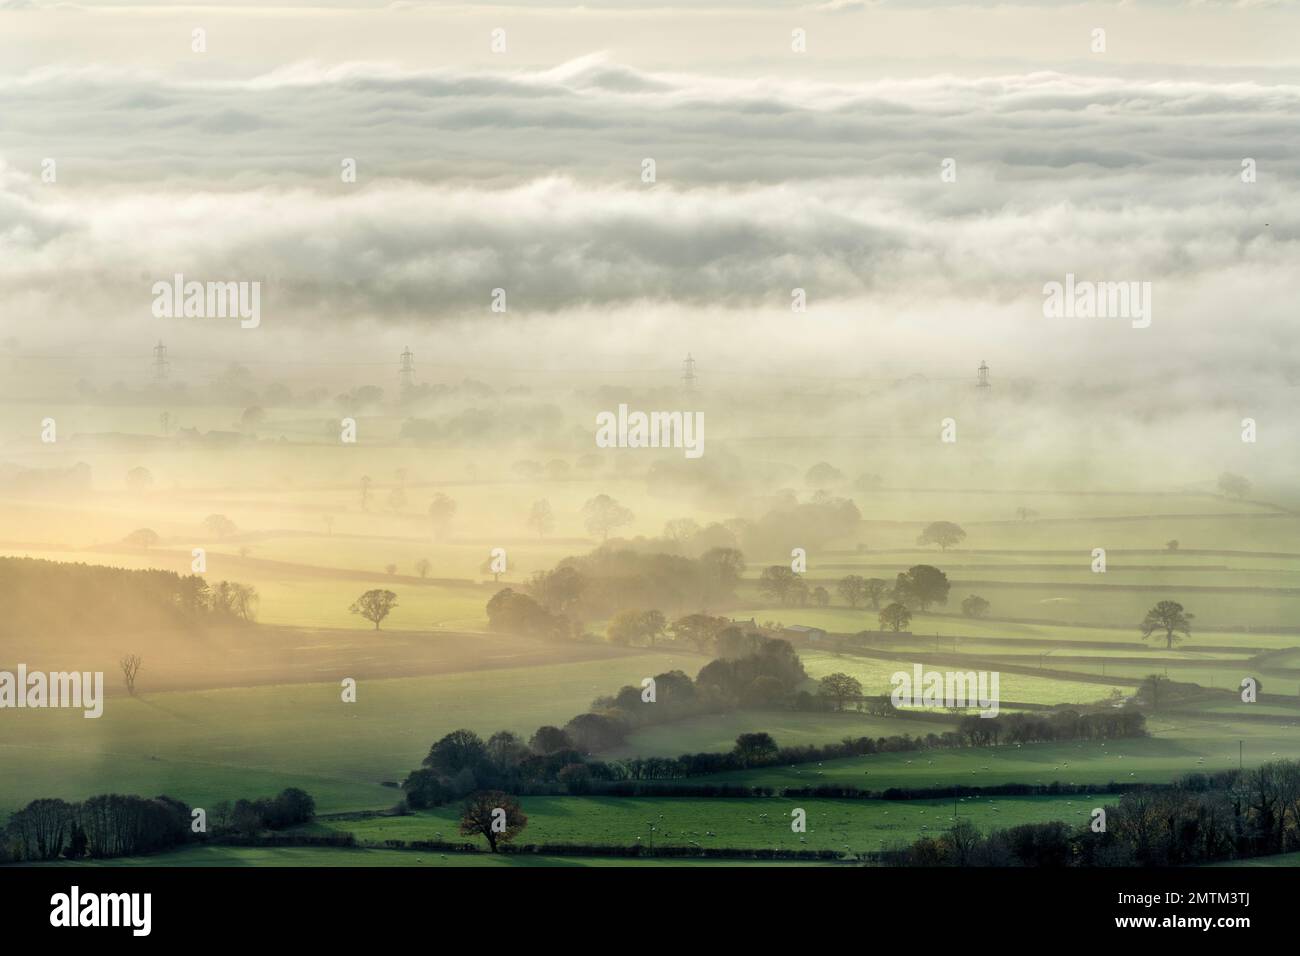 Thick, low lying mist around Thirsk and Sutton Bank, North Yorkshire, England Stock Photo